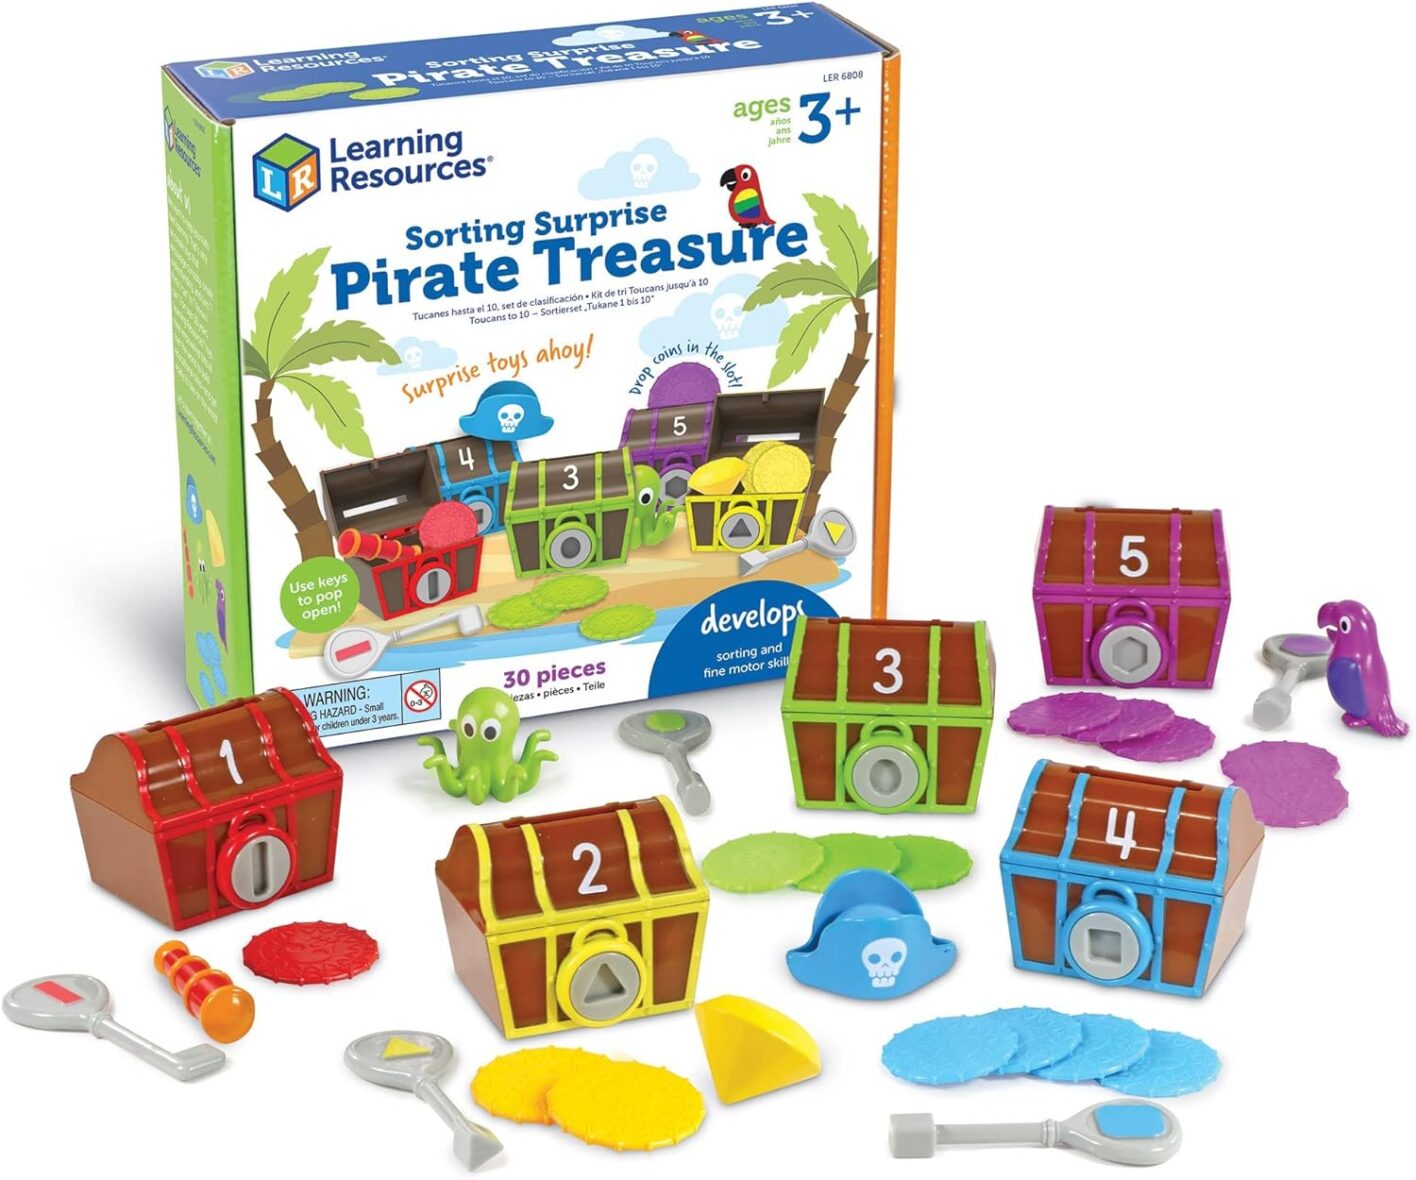 Learning Resources Sorting Surprise Pirate Treasure – 30 Pieces, Ages 3+ Color, Sorting & Matching Skills Toy, Fine Motor Skills Toys for Toddlers, Preschool Learning Toys Ms Rachel toy